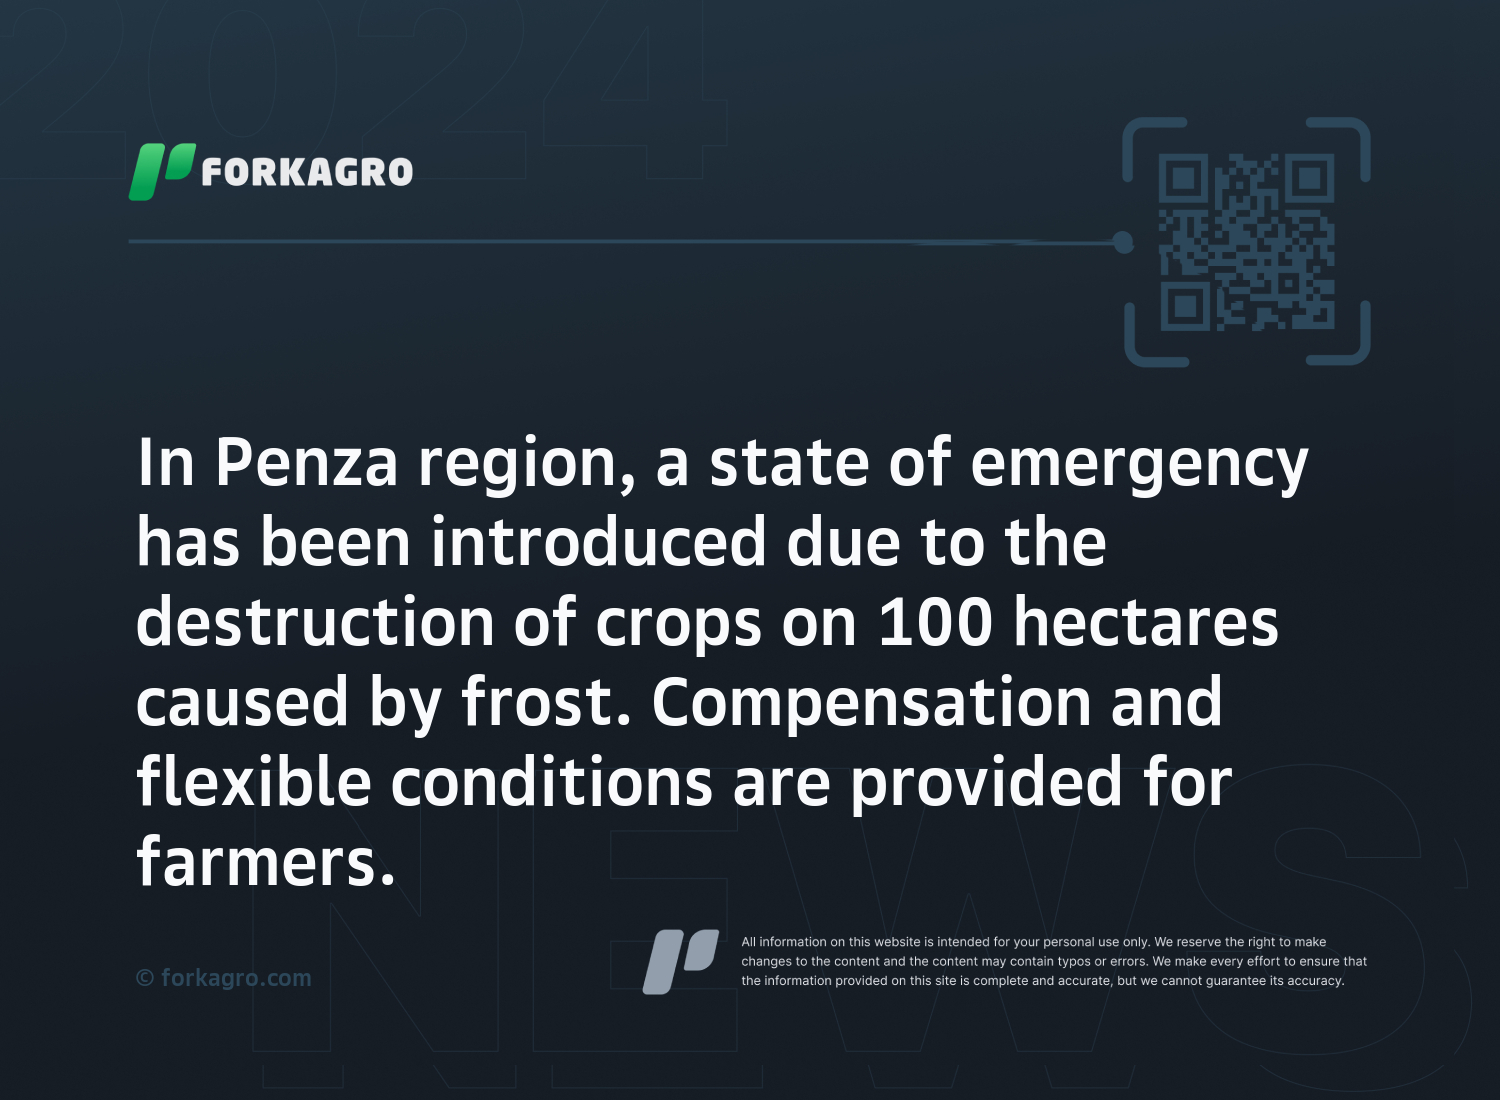 In Penza region, a state of emergency has been introduced due to the destruction of crops on 100 hectares caused by frost. Compensation and flexible conditions are provided for farmers.